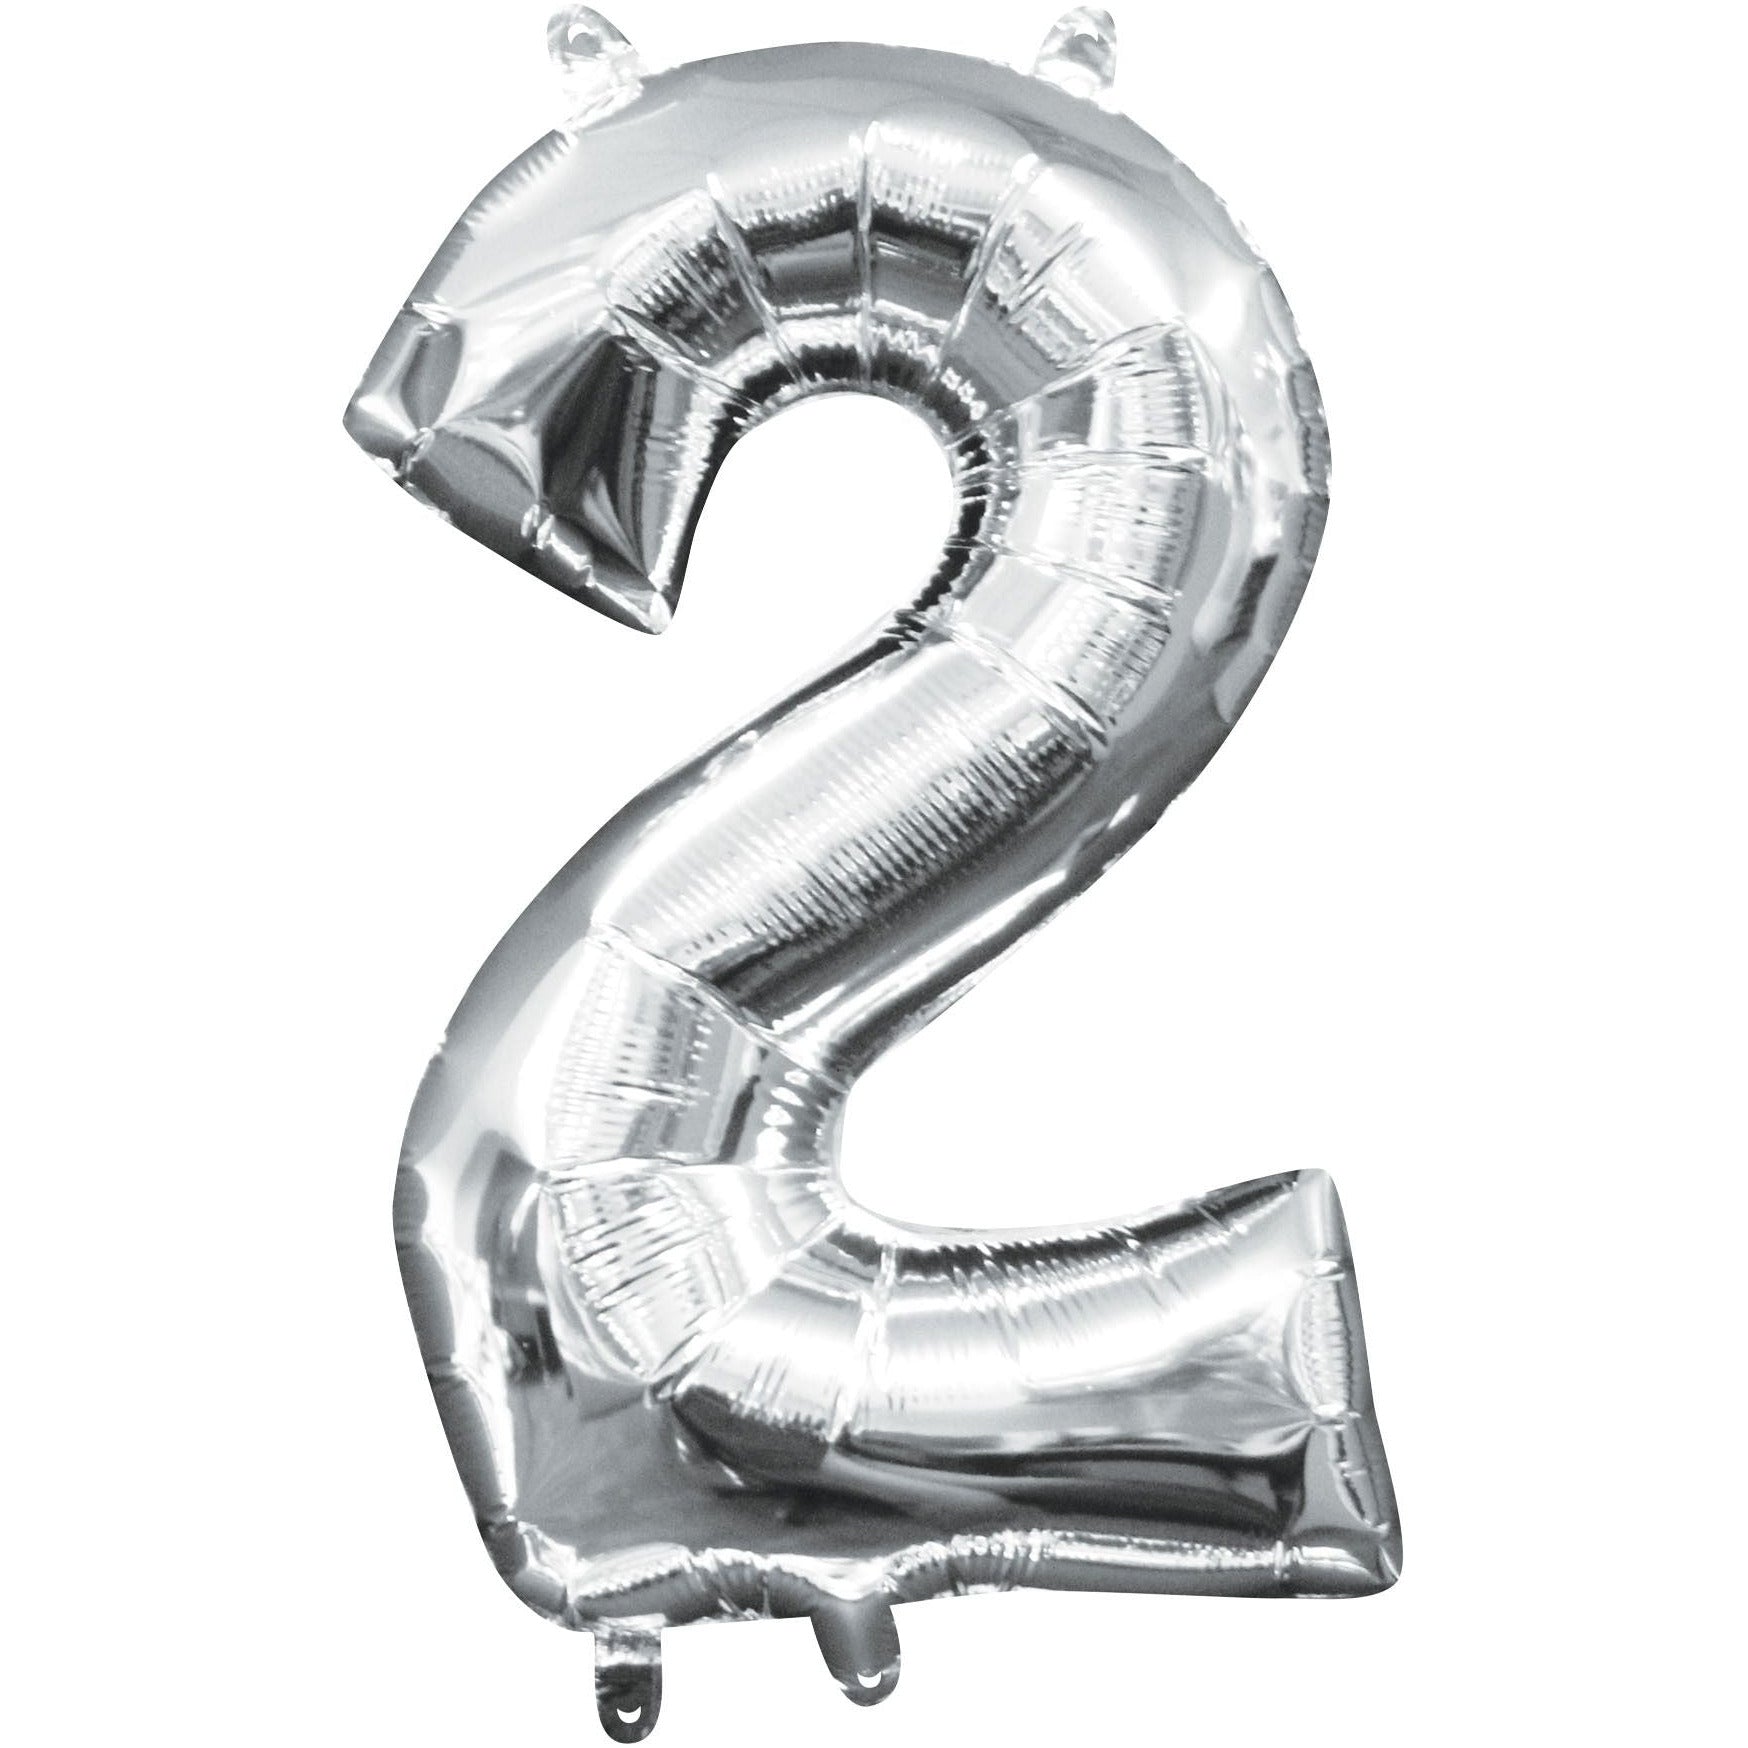 Amscan BALLOONS Balloon Air-Filled Number "2"- Silver